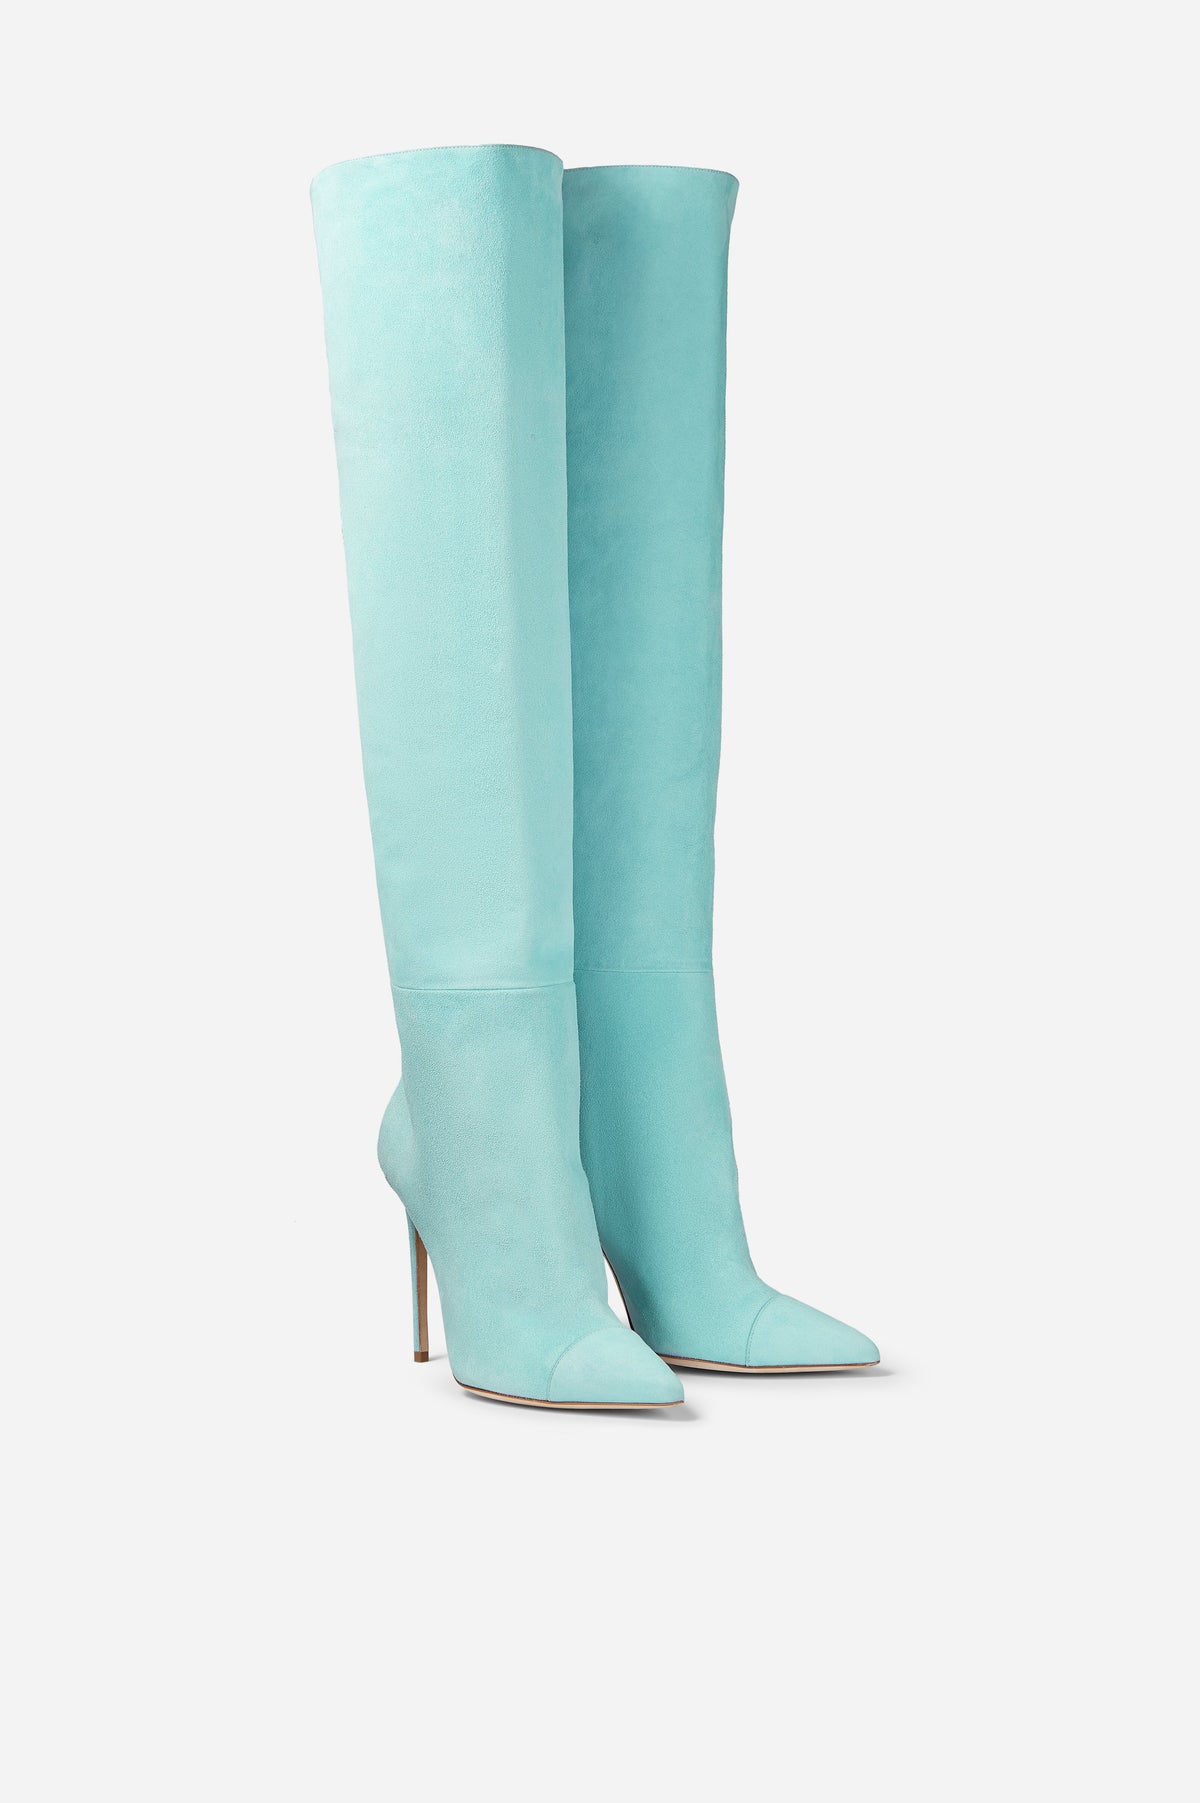 teal over the knee boots